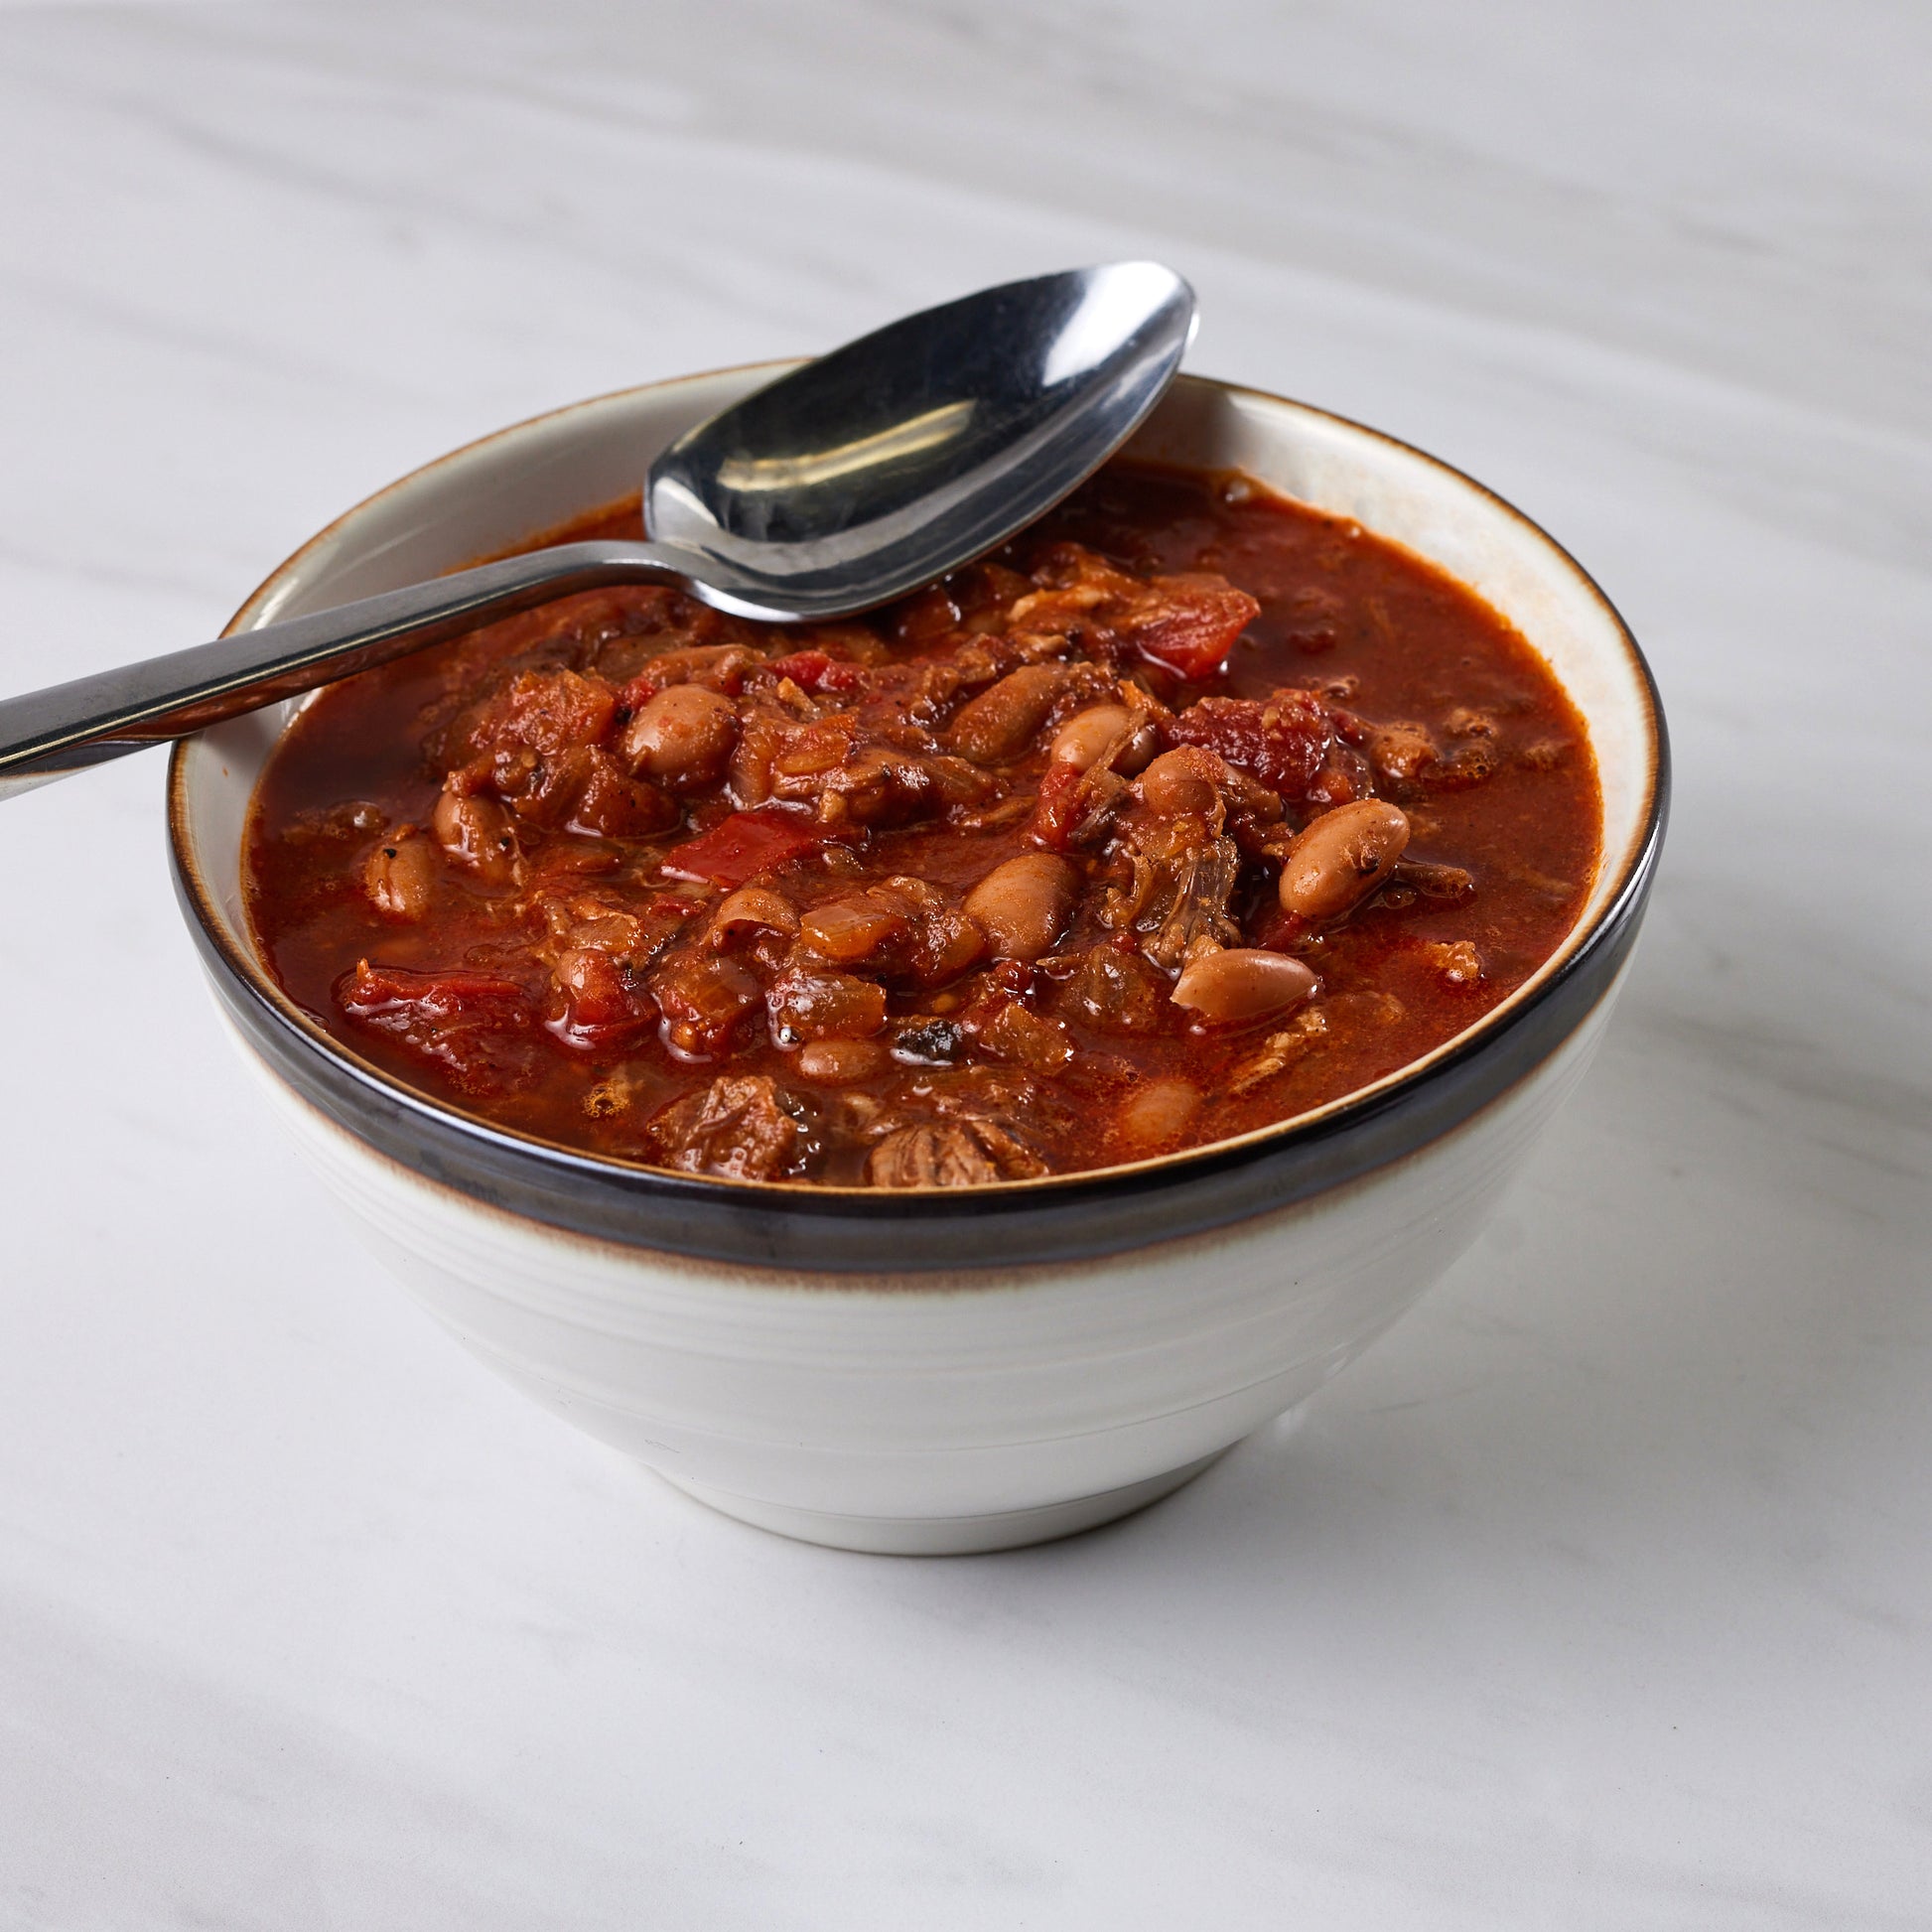 East Coast-style Chili for meal delivery in the Denver area